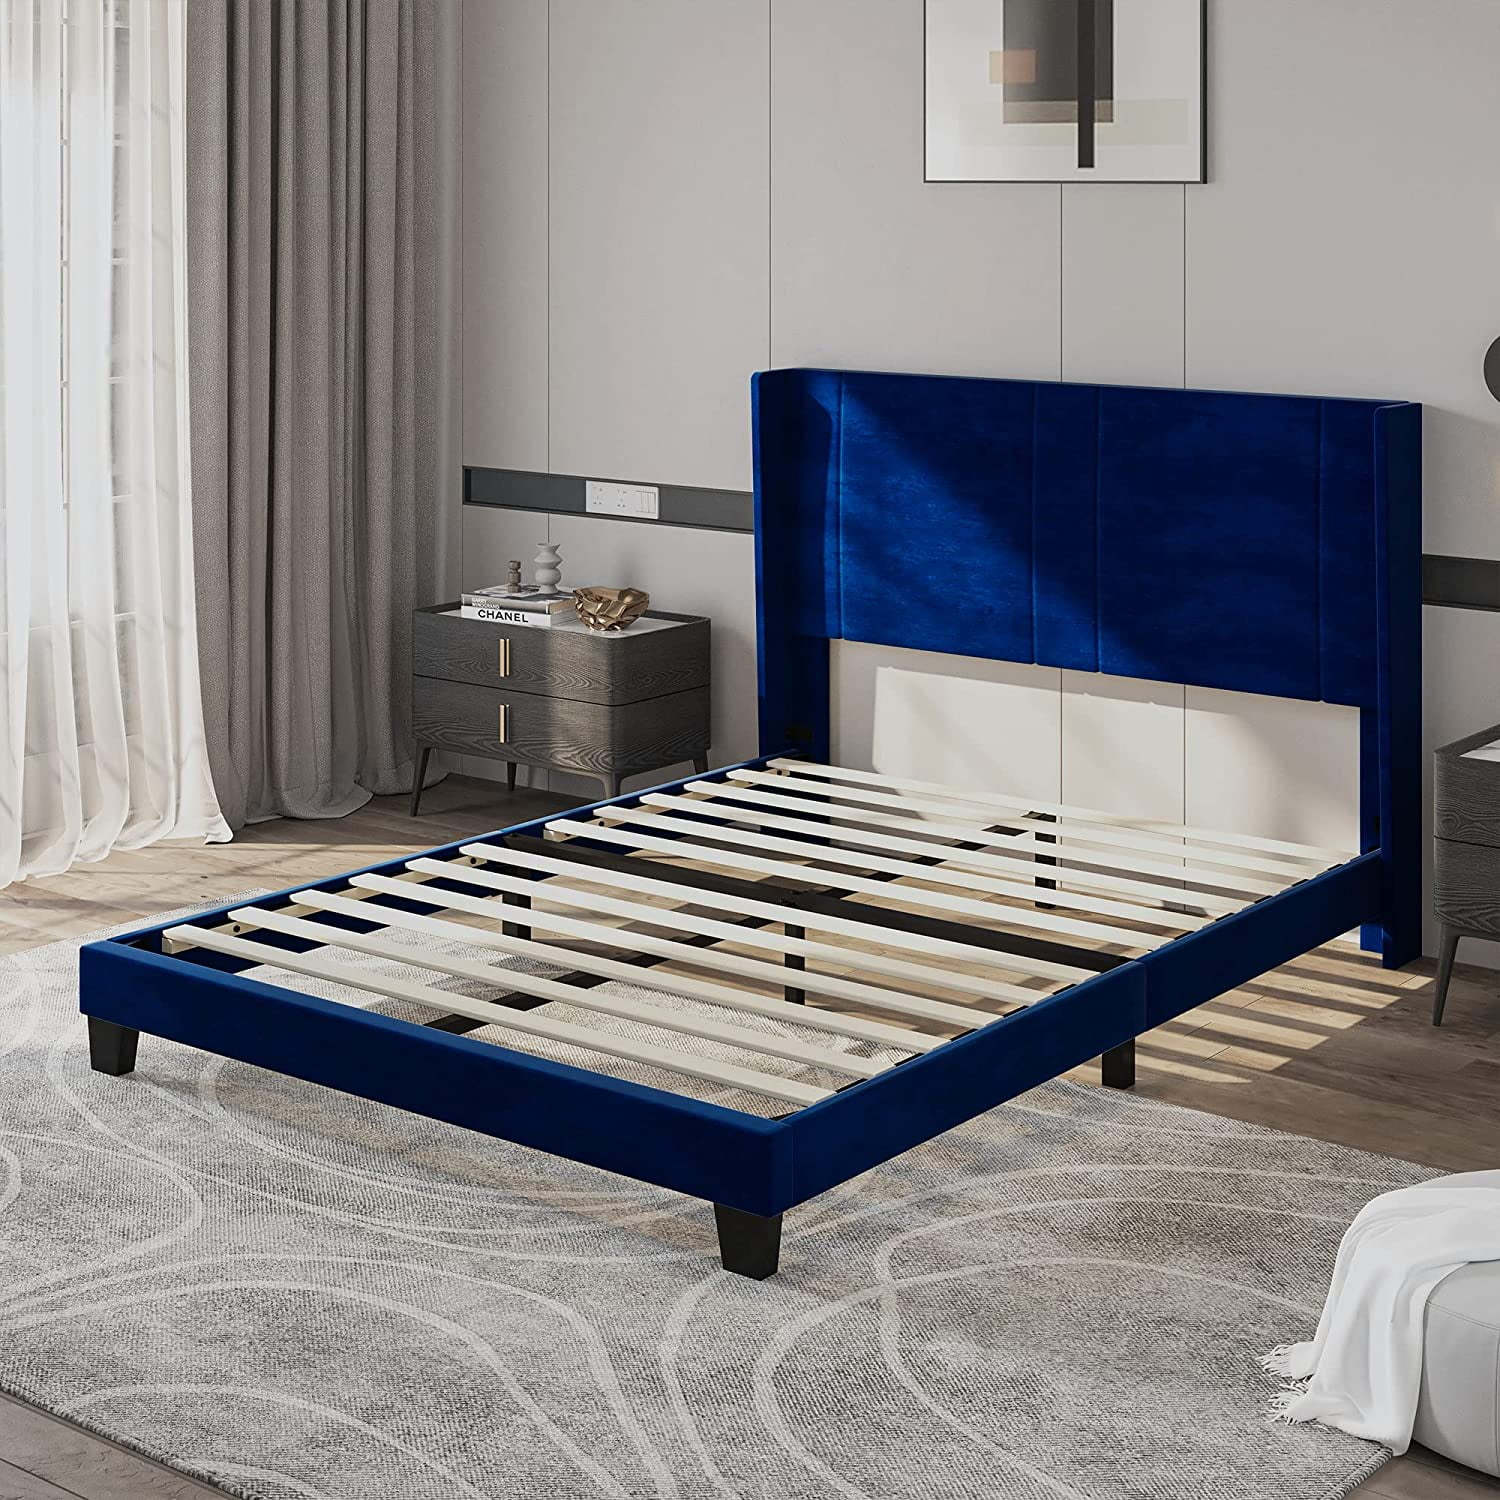 Dextrus Upholstered Wingback Platform Bed with Navy Blue Velvet Headboard, Bed Frame with Wood Slat / No Box Spring Needed / Mattress Foundation (Full)